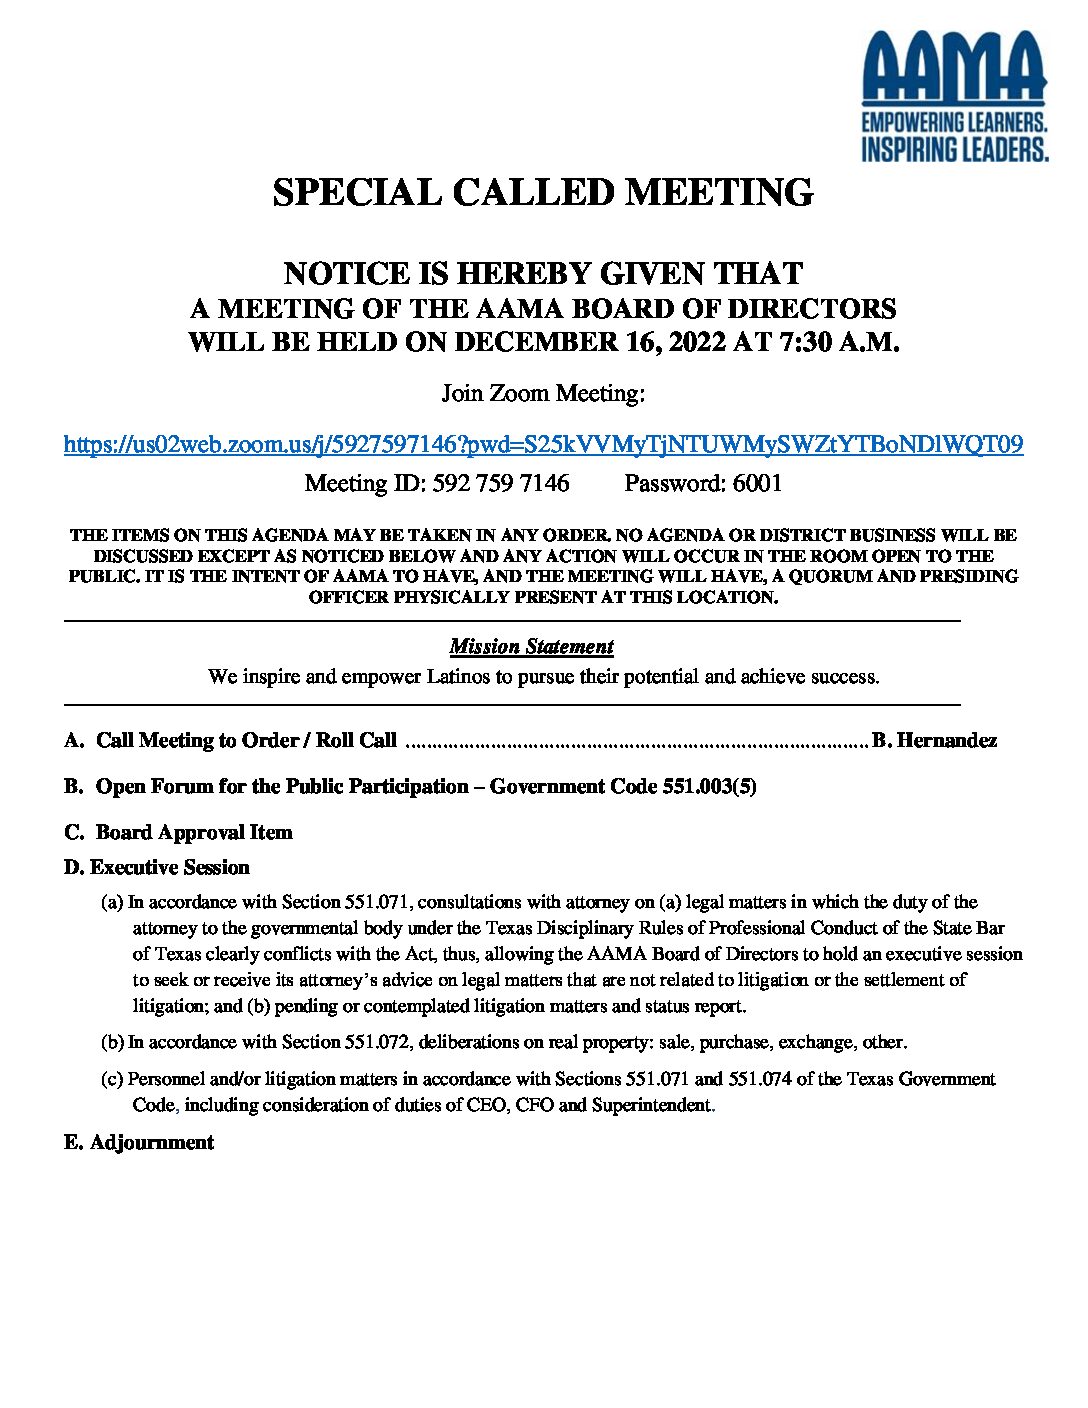 AAMA Special Called Mtg_Board Agenda_12.16.2022 Association for the